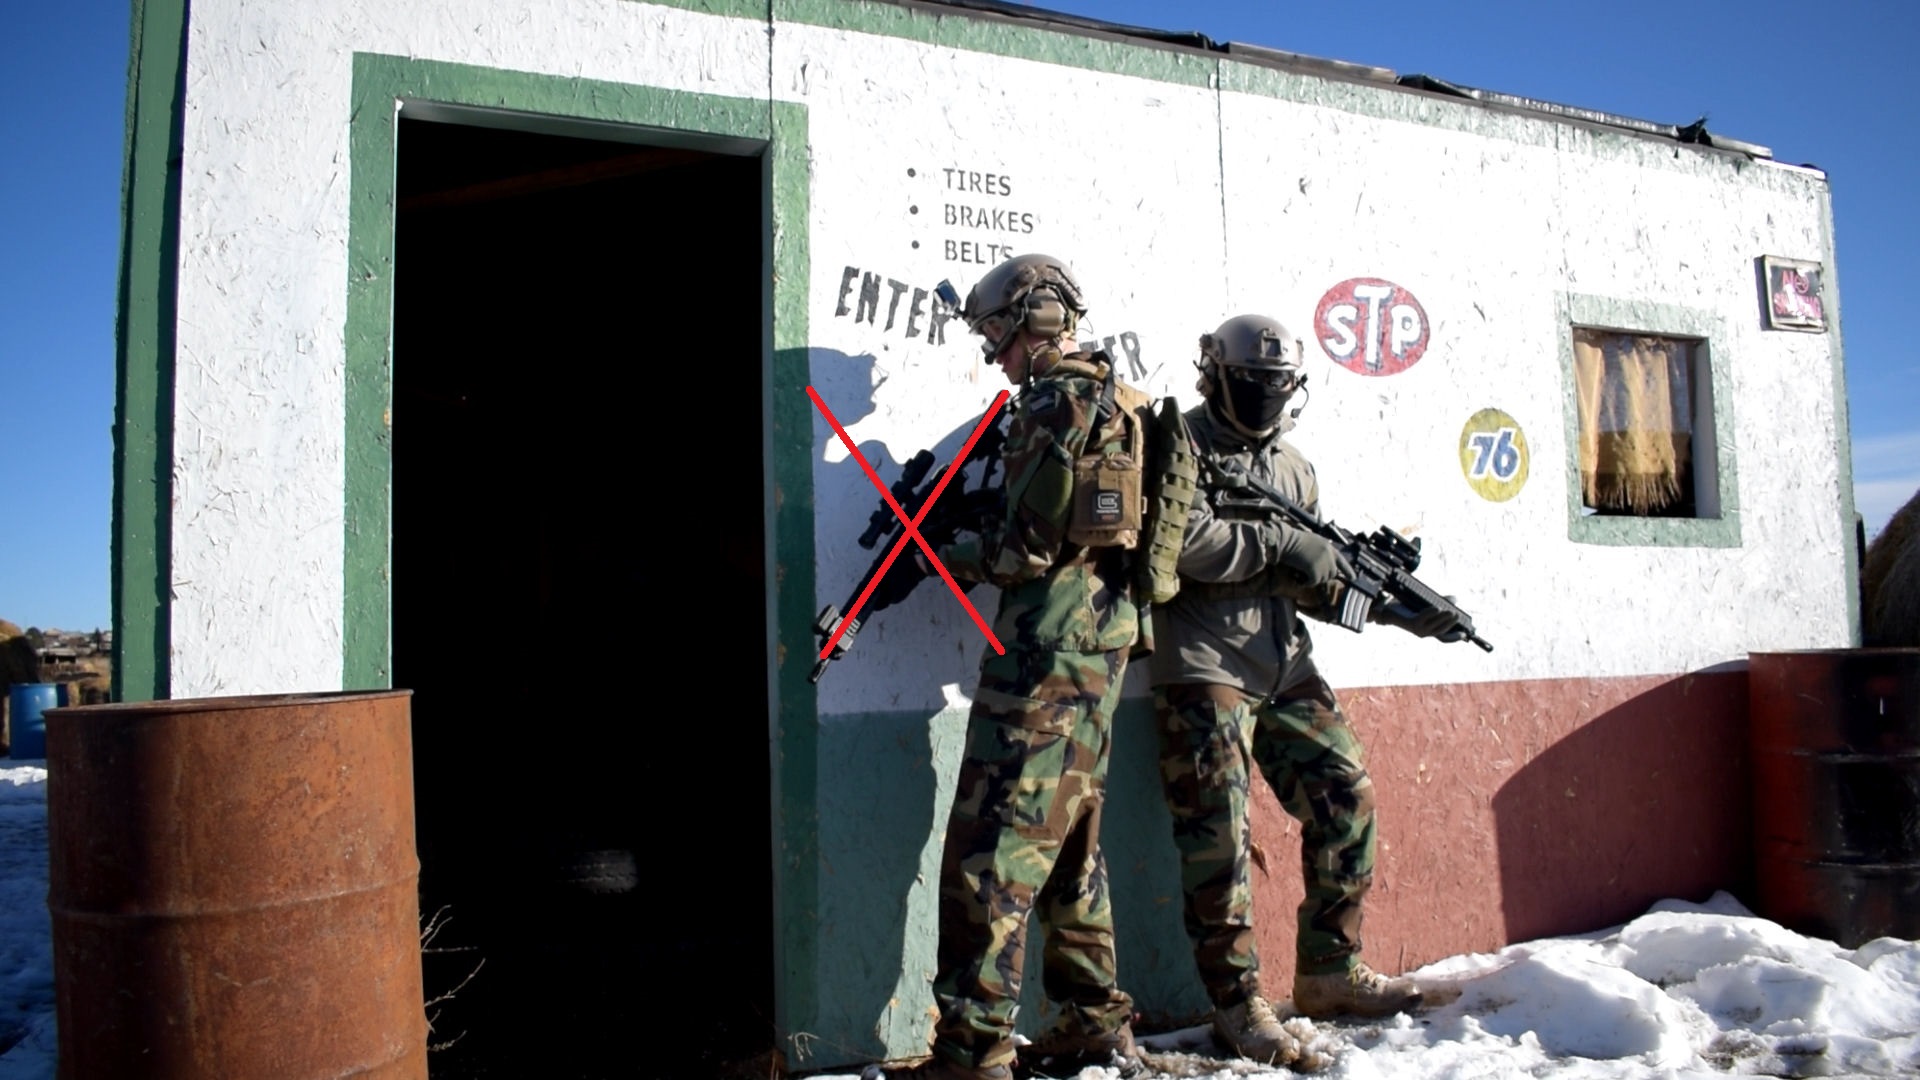 Two airsoft players in full combat gear standing against a wall with a red "X" over one player to possibly denote an instructional scenario or a safety violation.